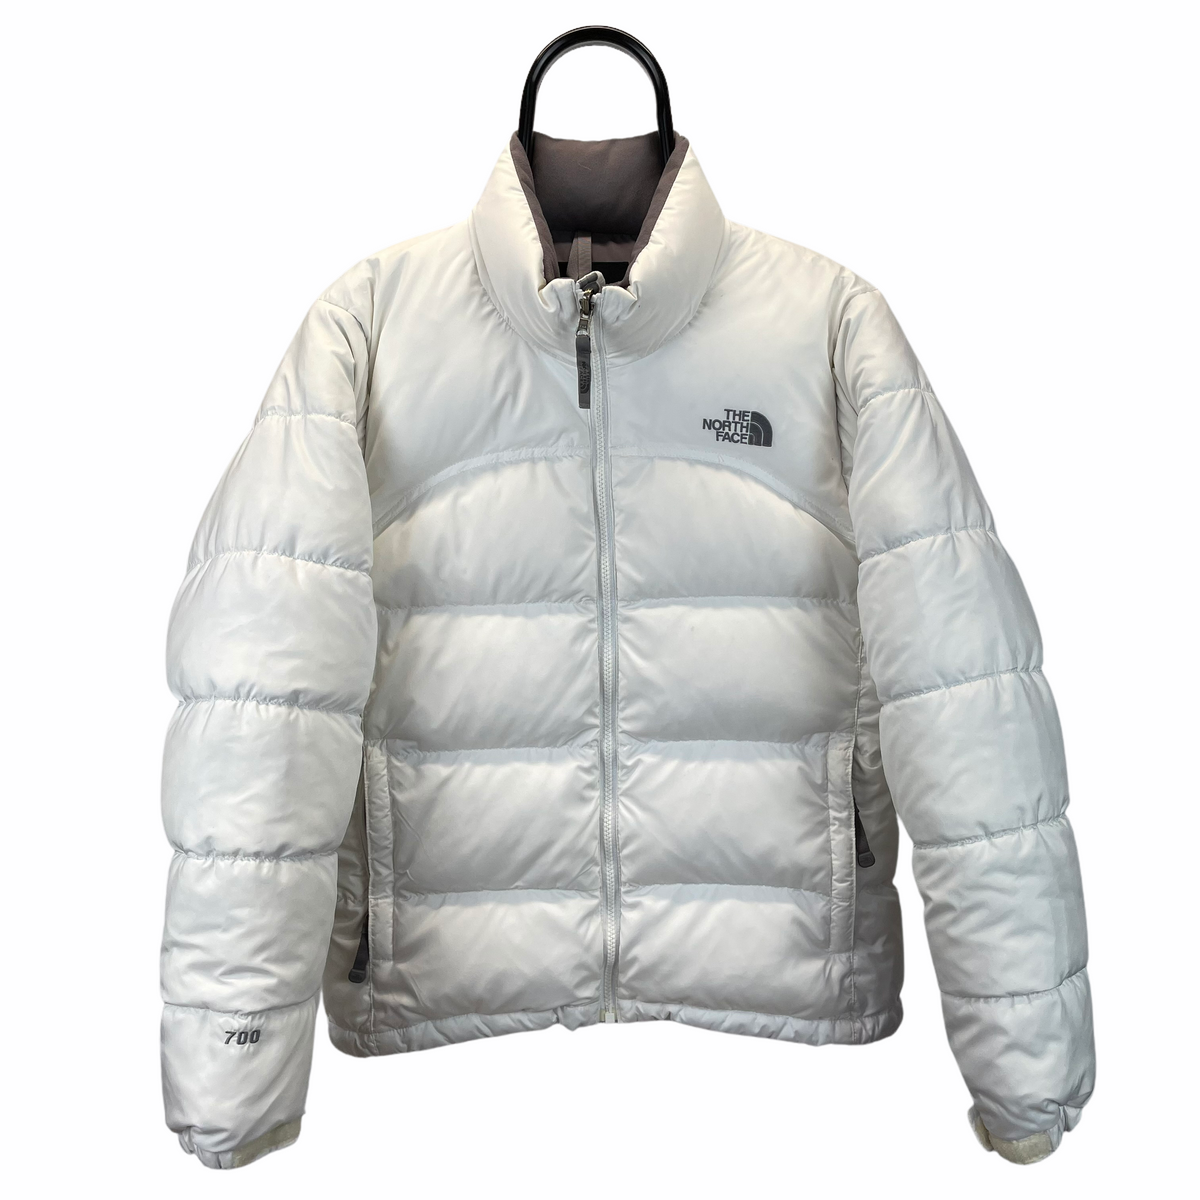 The North Face Nuptse 700 Down Puffer Jacket in White - Men's Small/Wo ...